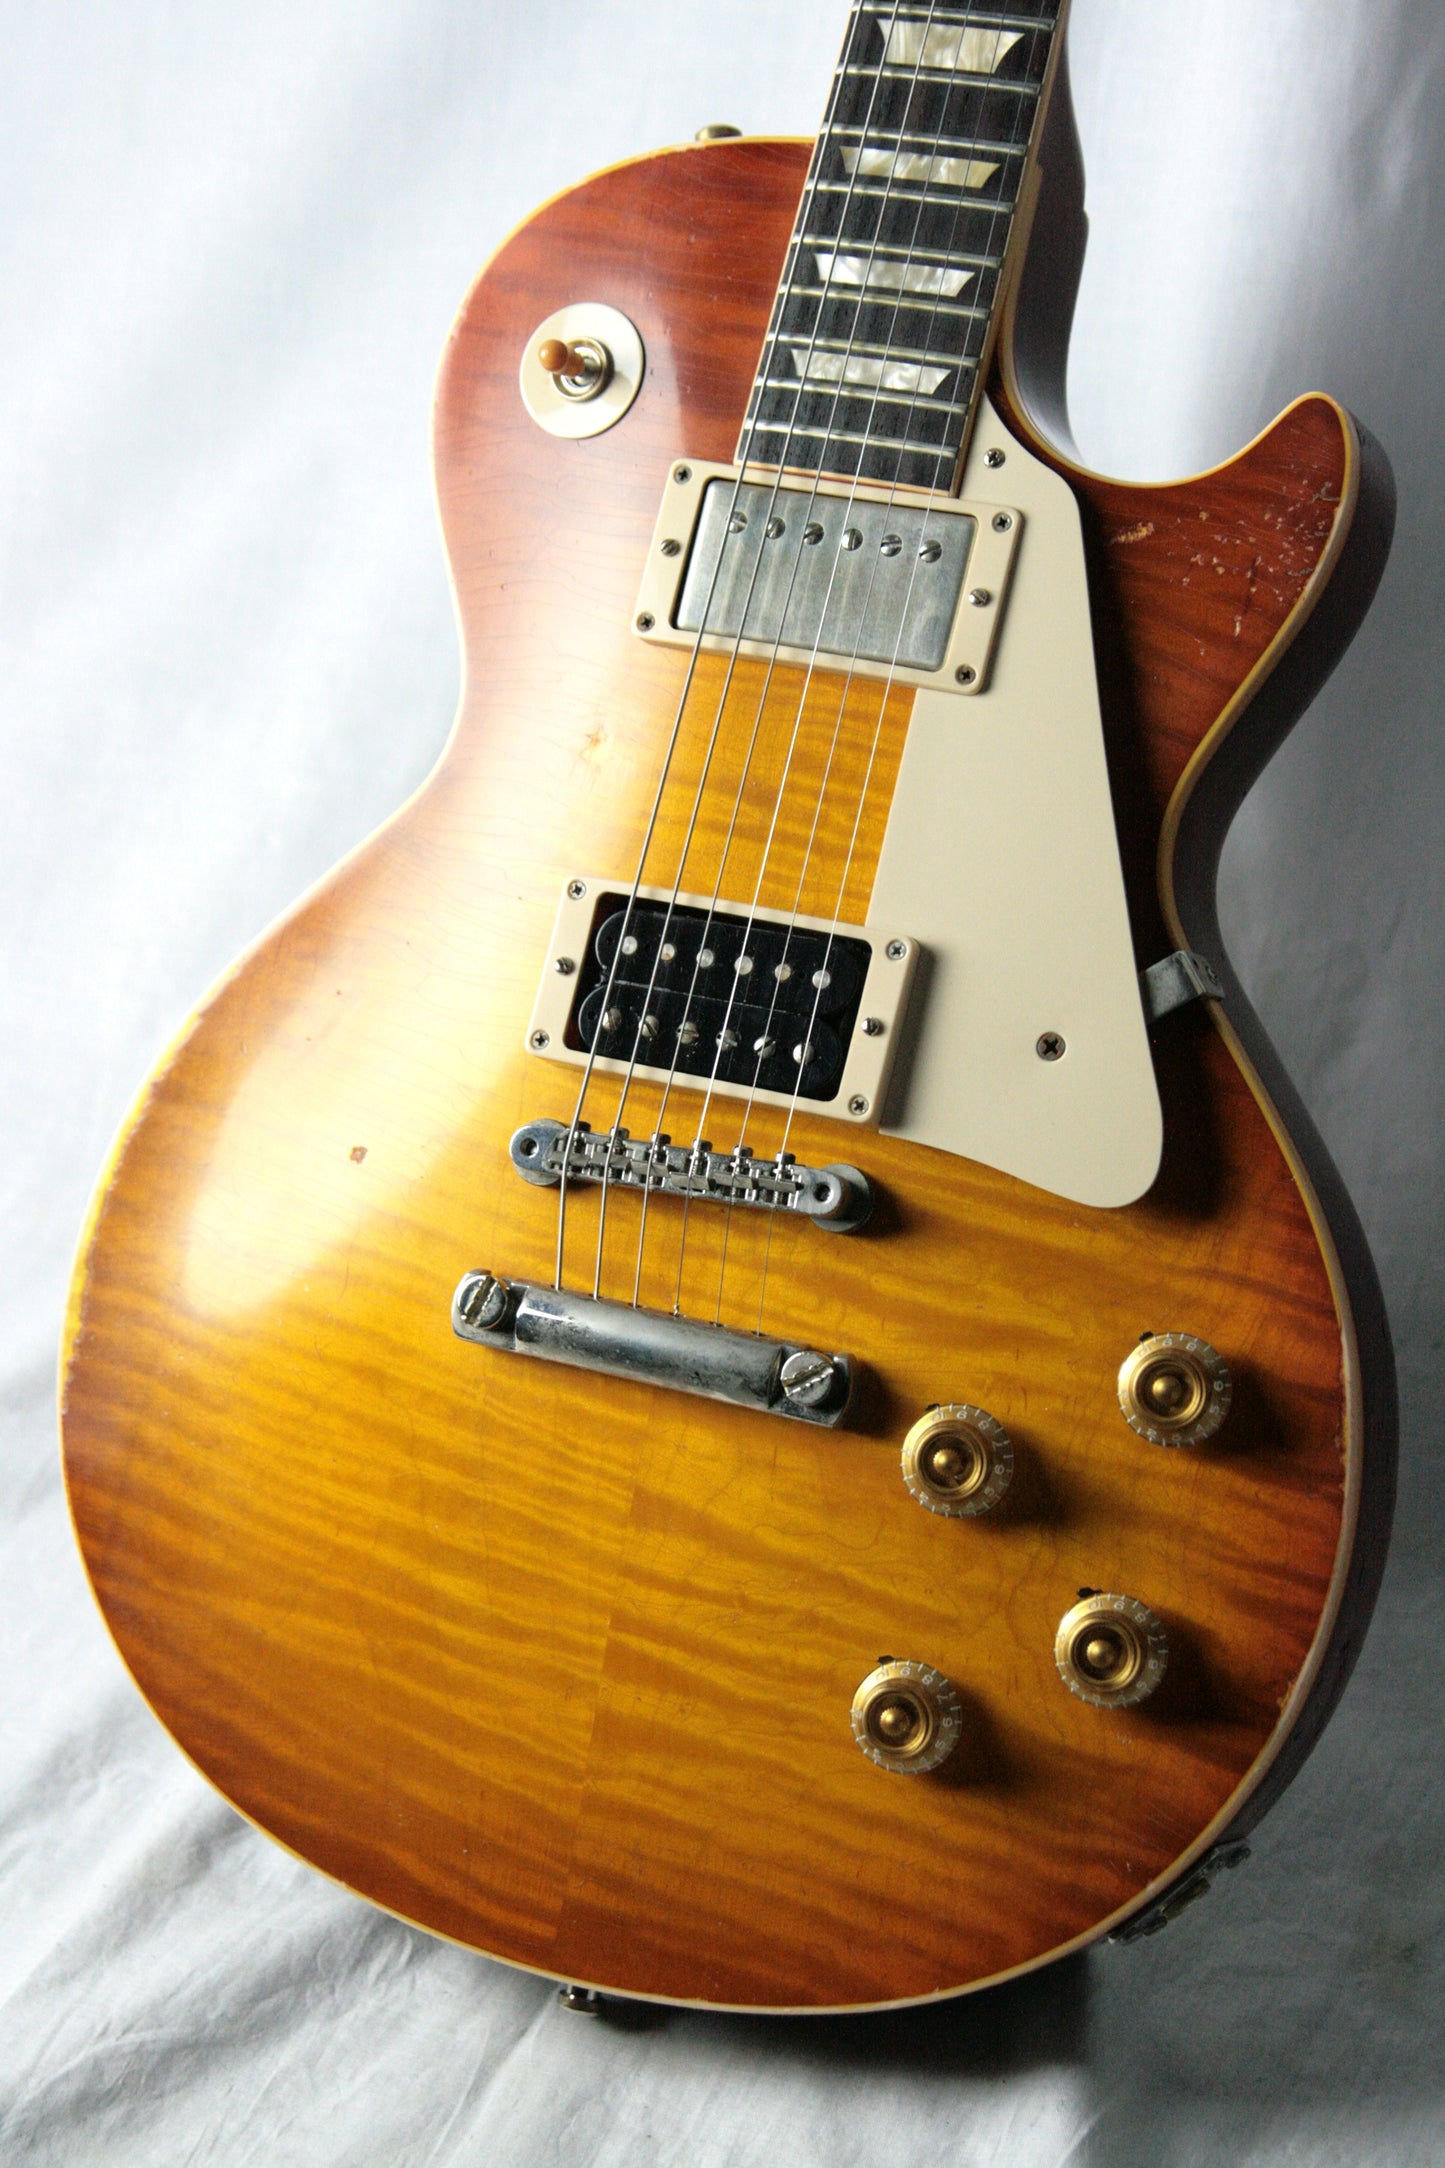 2004 Gibson Jimmy Page Tom Murphy AGED 1959 Les Paul Number One! 59 Reissue Signed COA! Custom Shop!